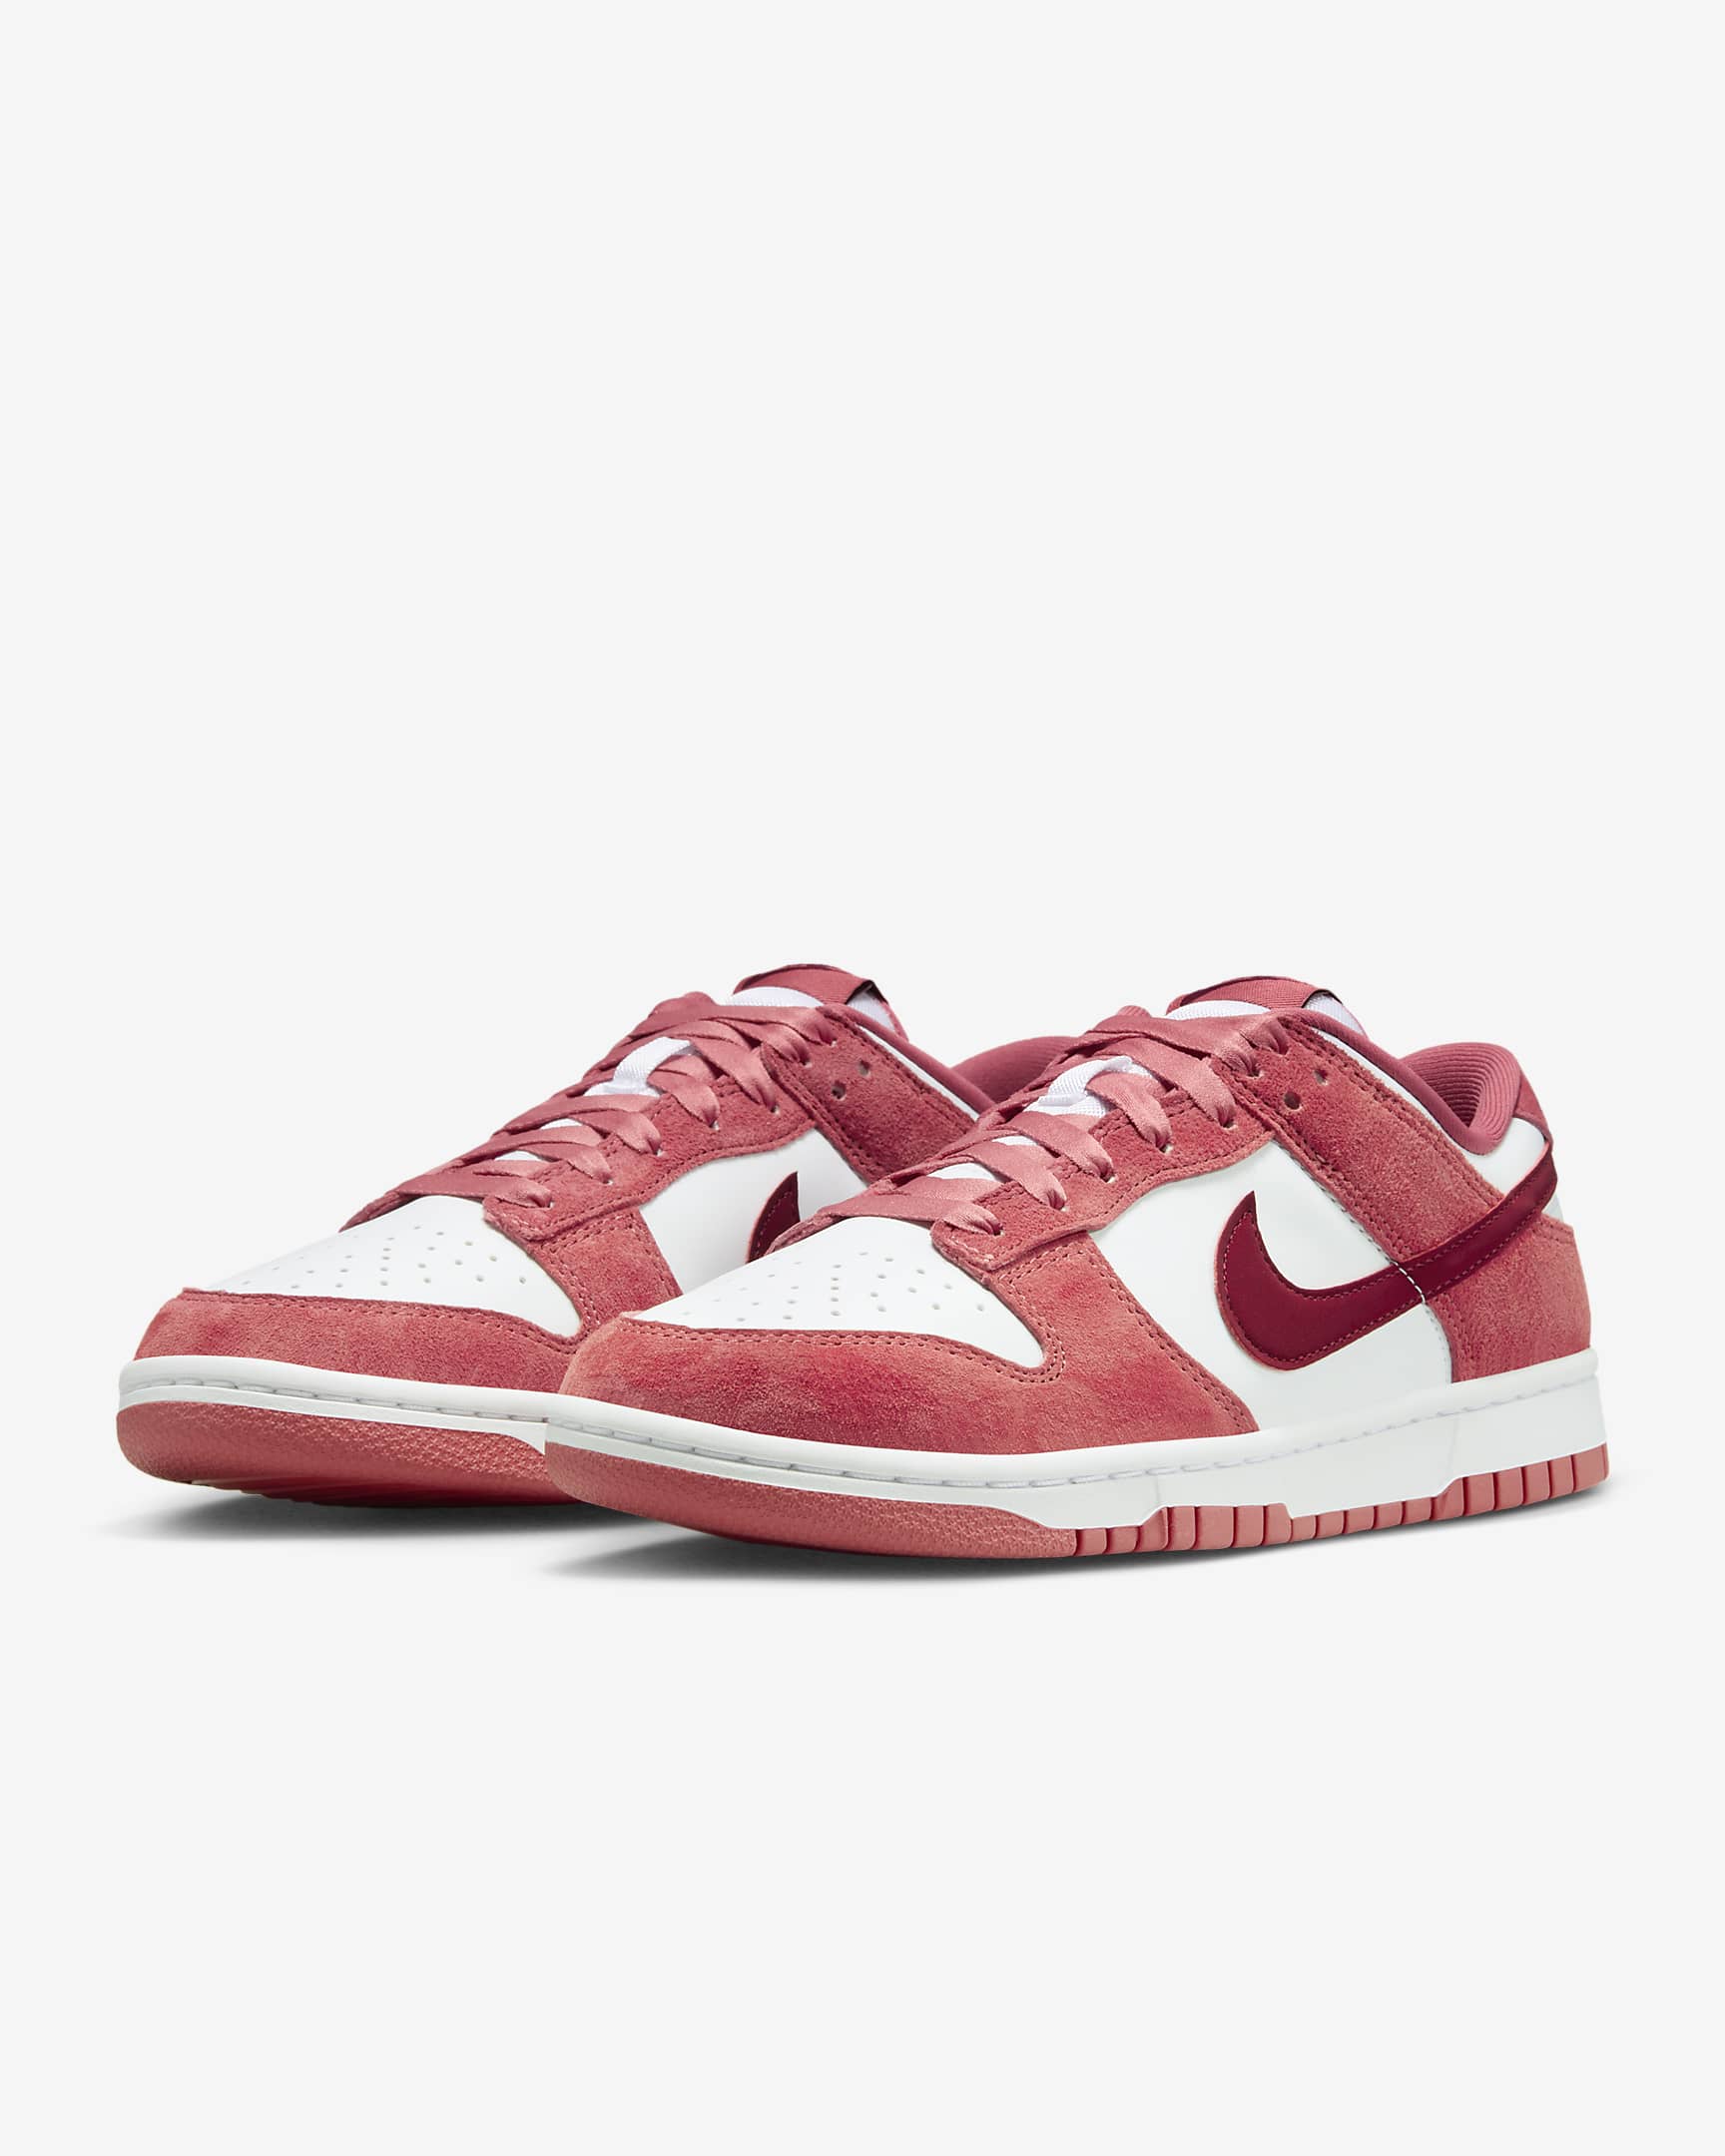 Nike Dunk Low Women's Shoes - White/Adobe/Dragon Red/Team Red